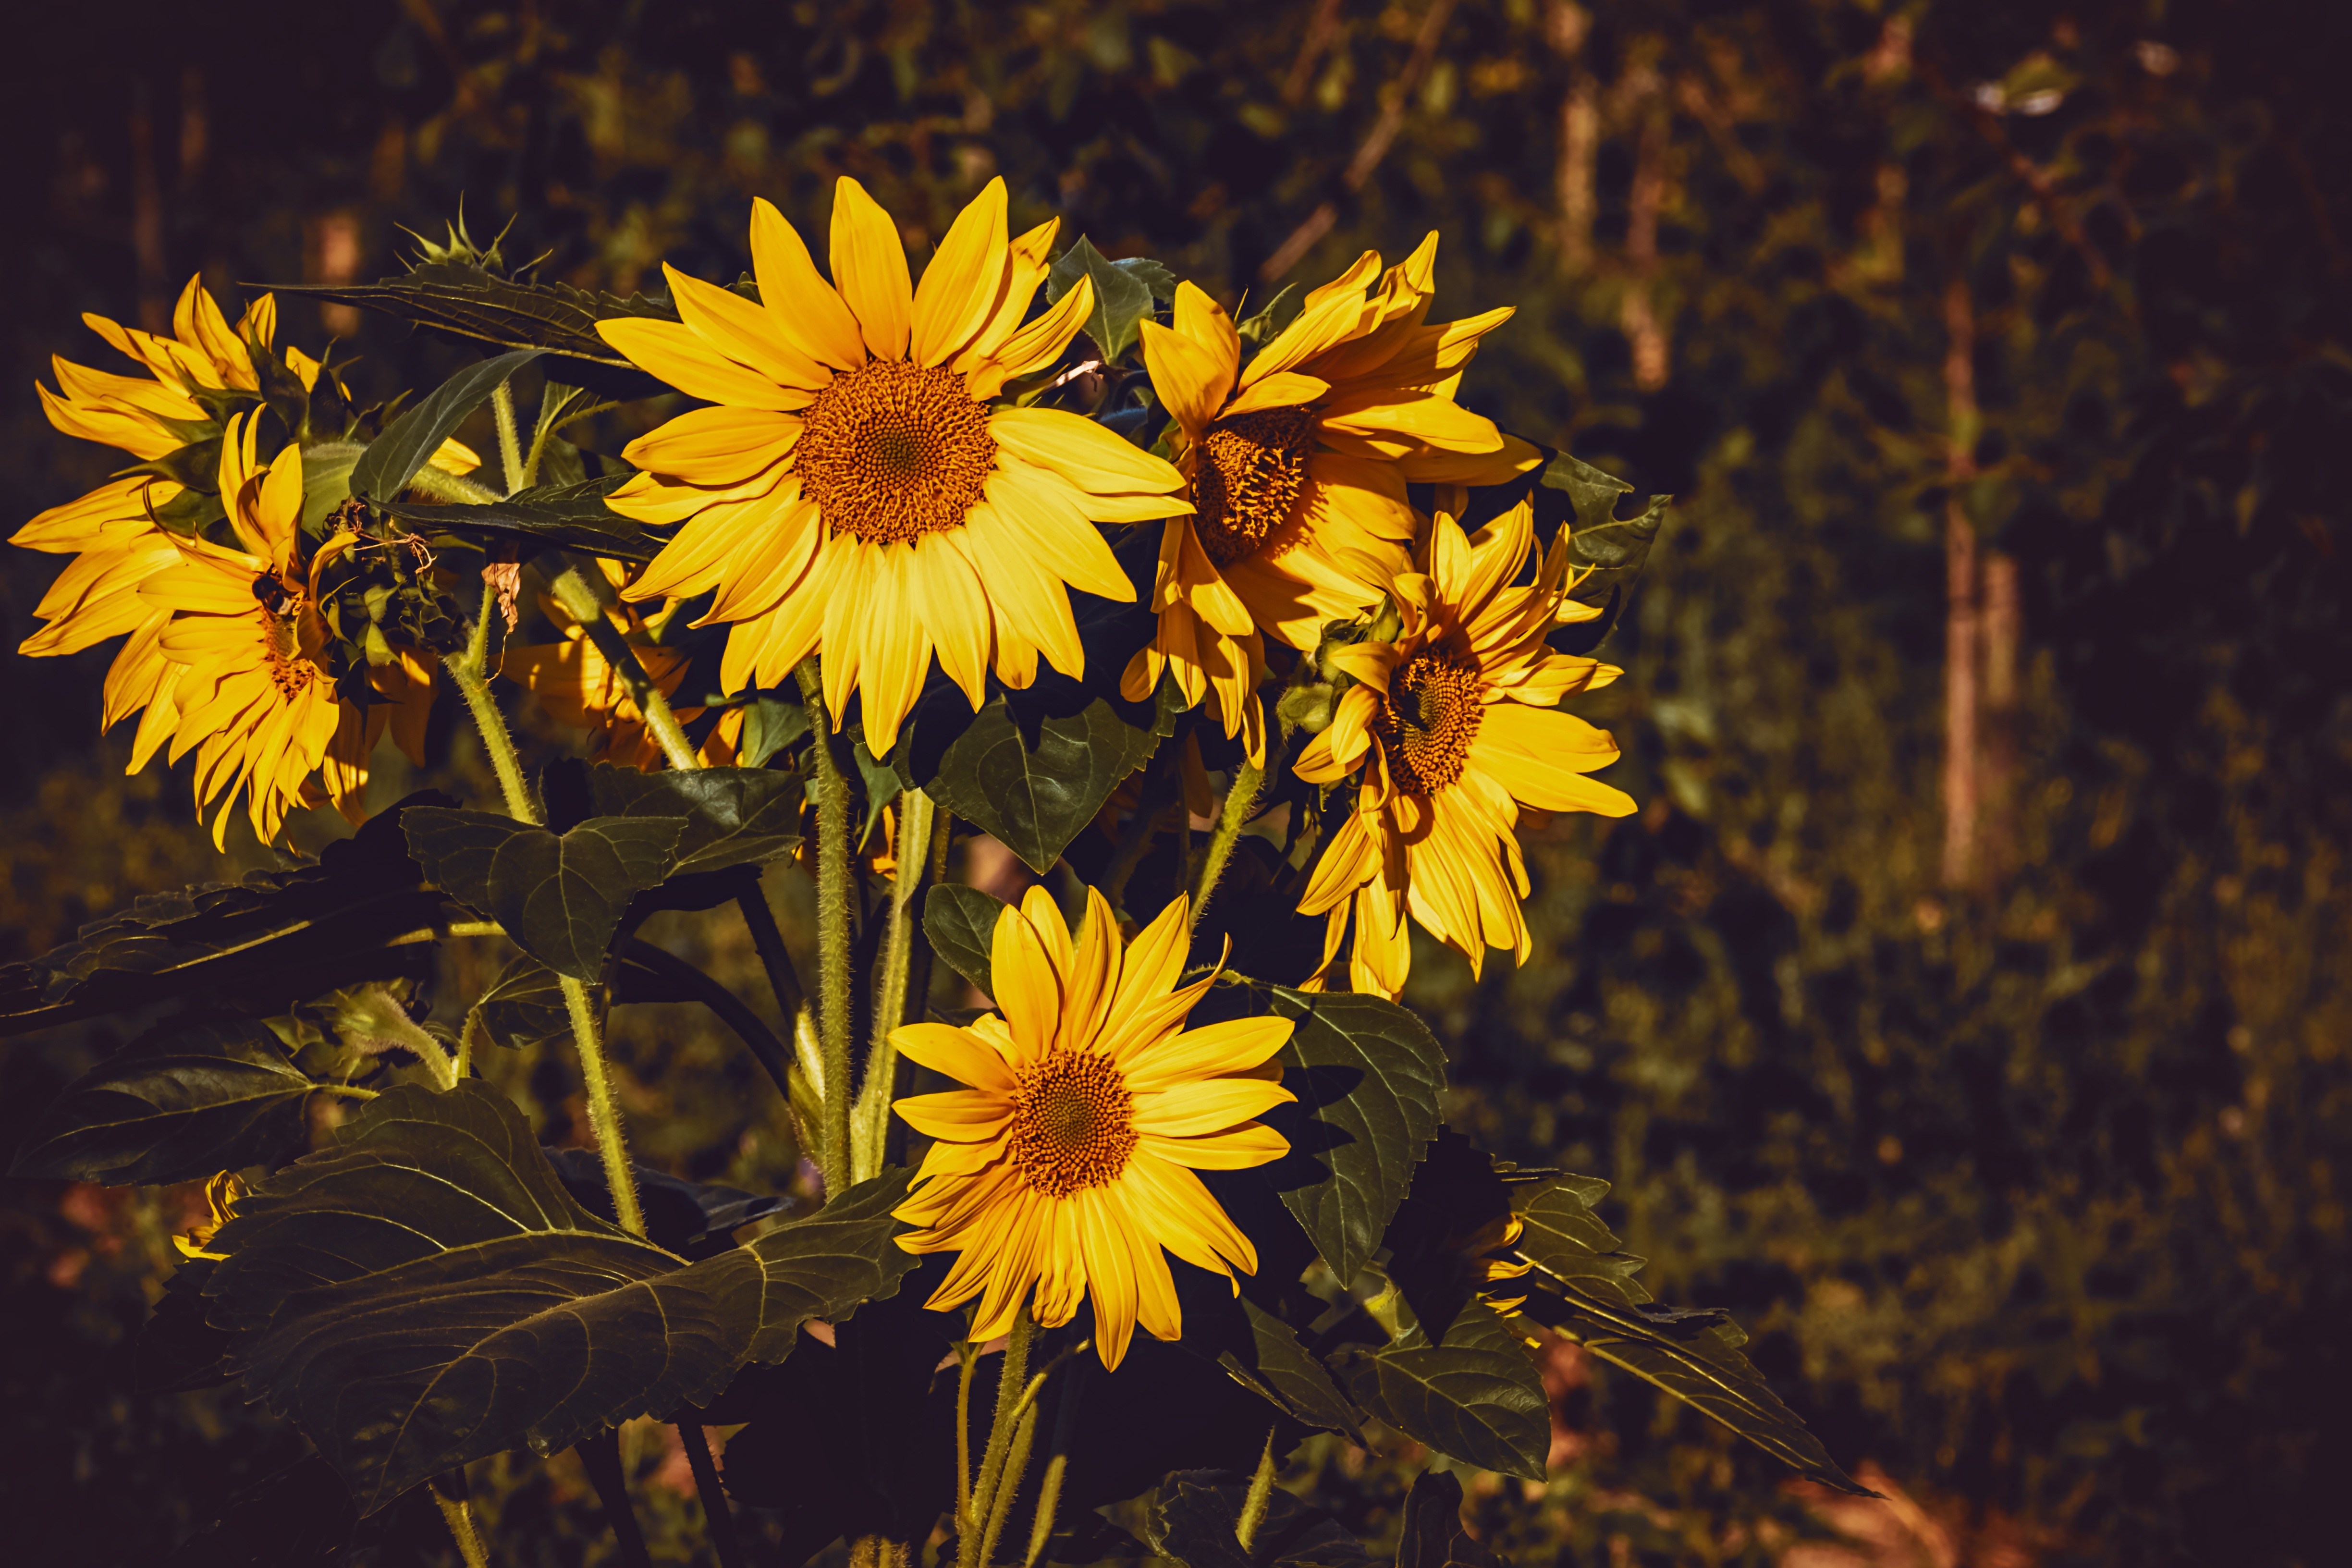 Popular Sunflower images for mobile phone